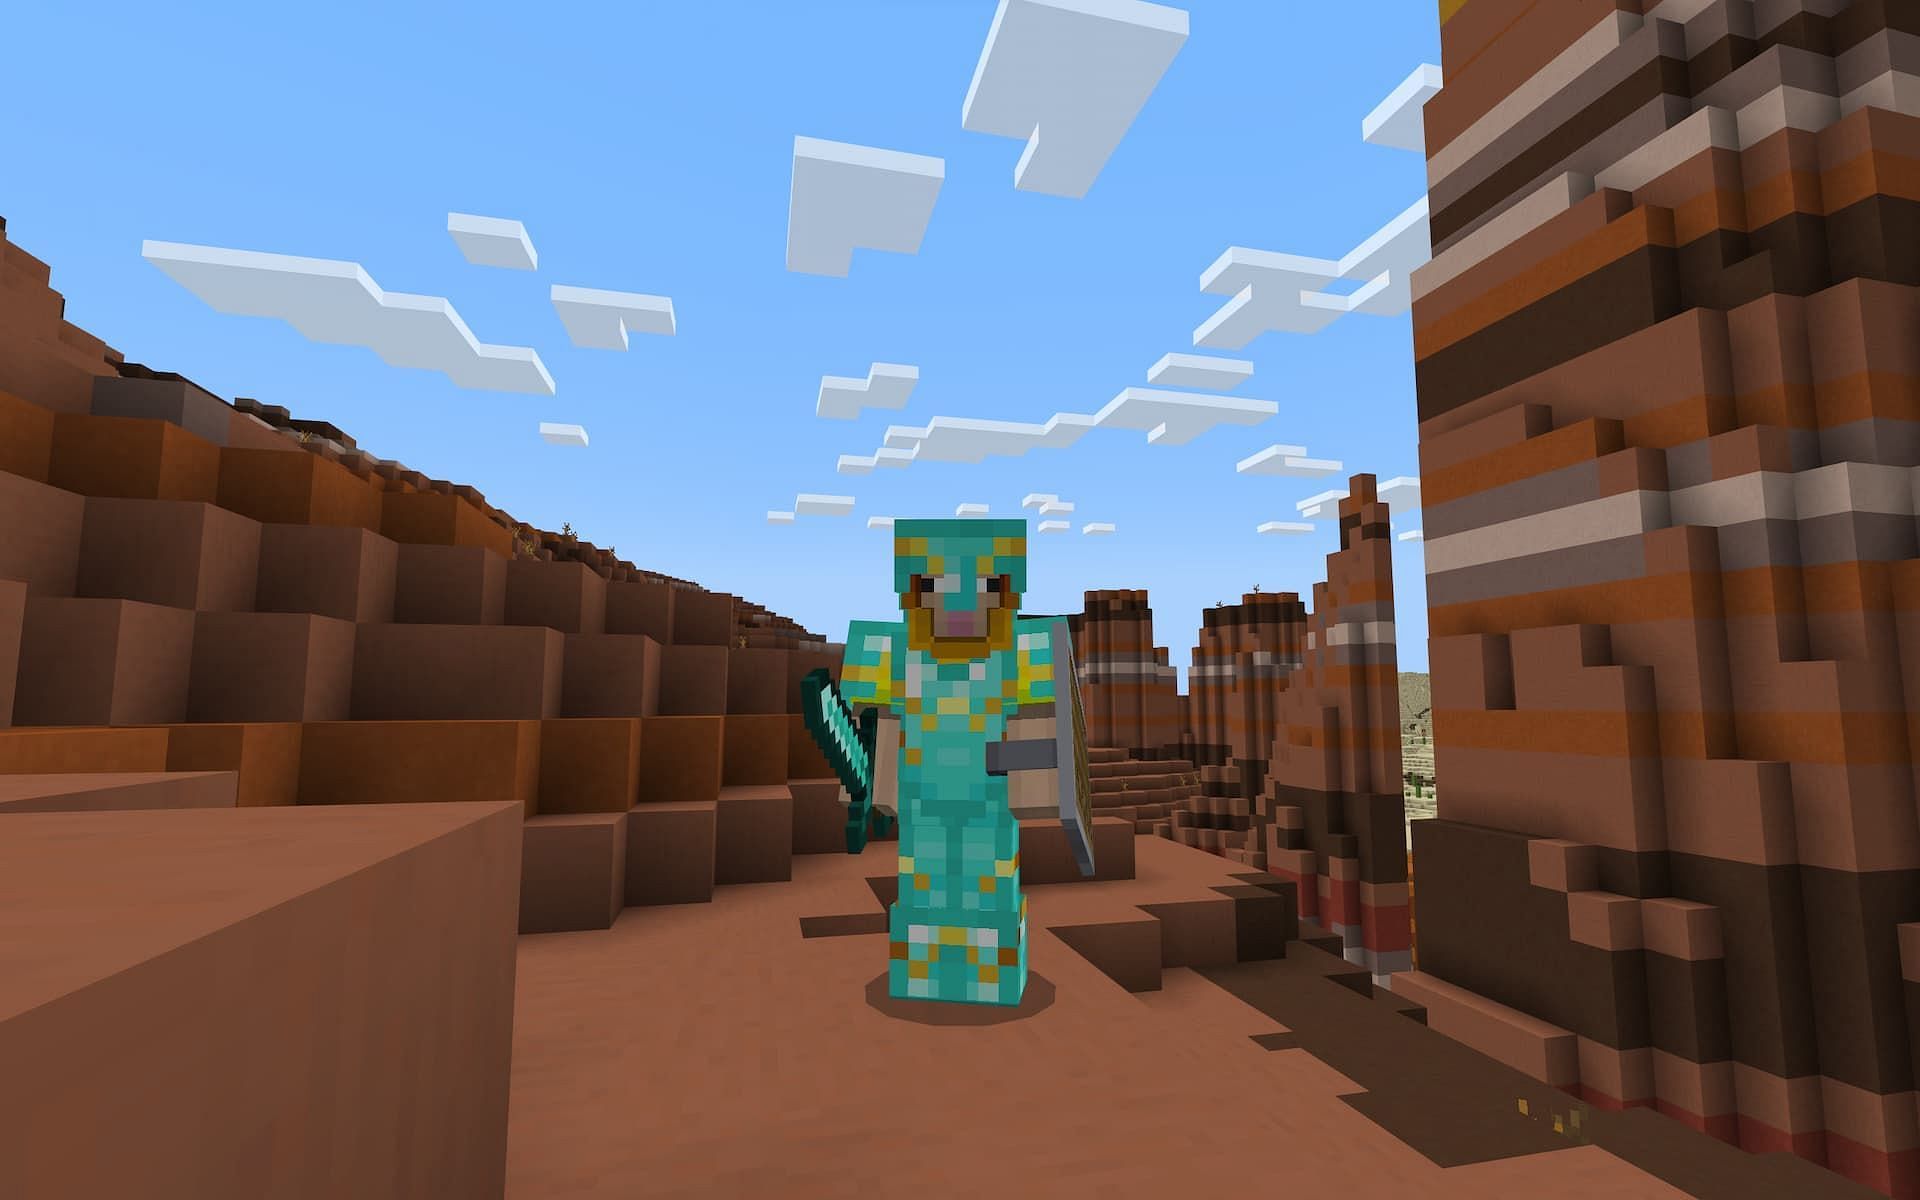 A player stands in a desert biome with a full set of Diamond armor with the Raiser armor trim.